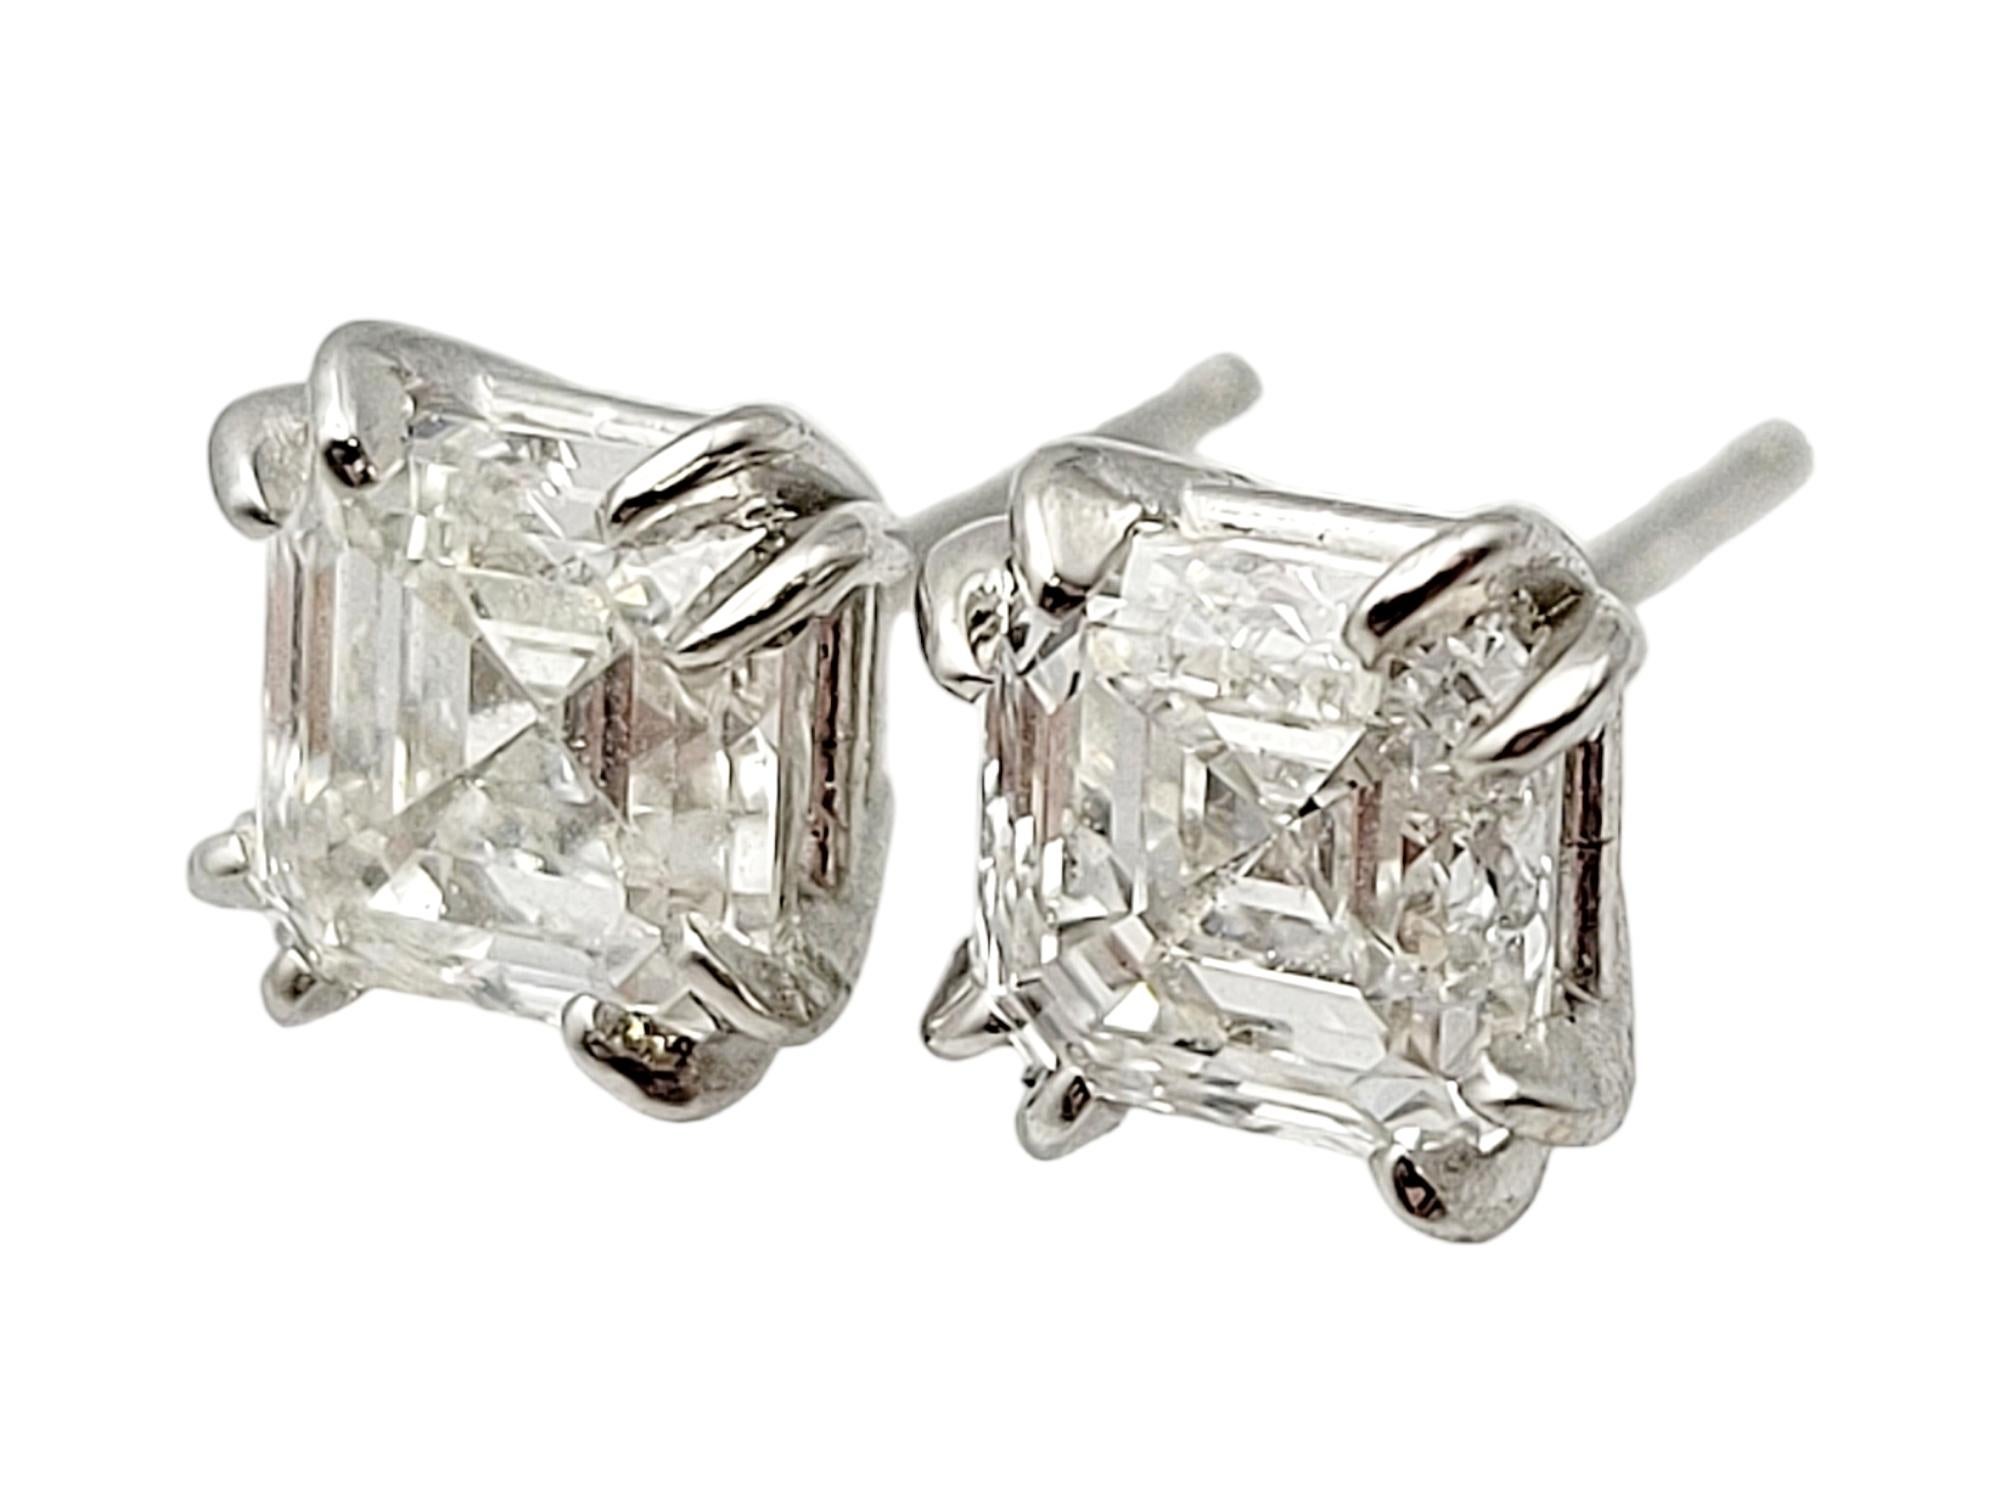 Utterly timeless diamond solitaire stud earrings. These gorgeous square diamond and white gold studs are the epitome of minimalist elegance. The simple yet elegant design can be worn with just about anything, making these your new 'everyday'